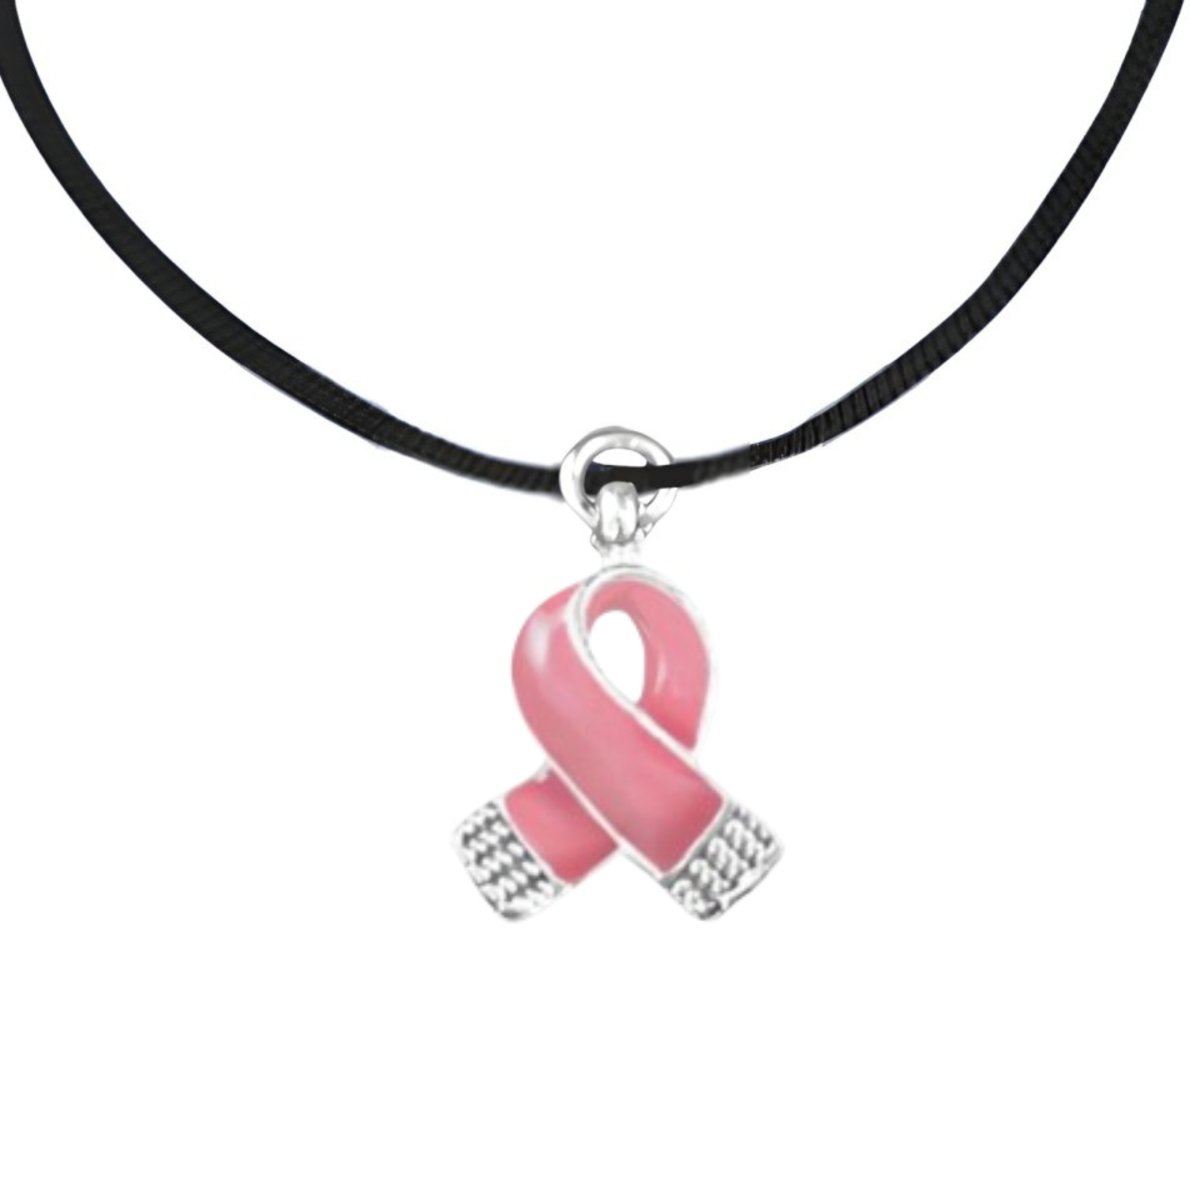 Pink Ribbon Leather Cord Necklaces - Fundraising For A Cause